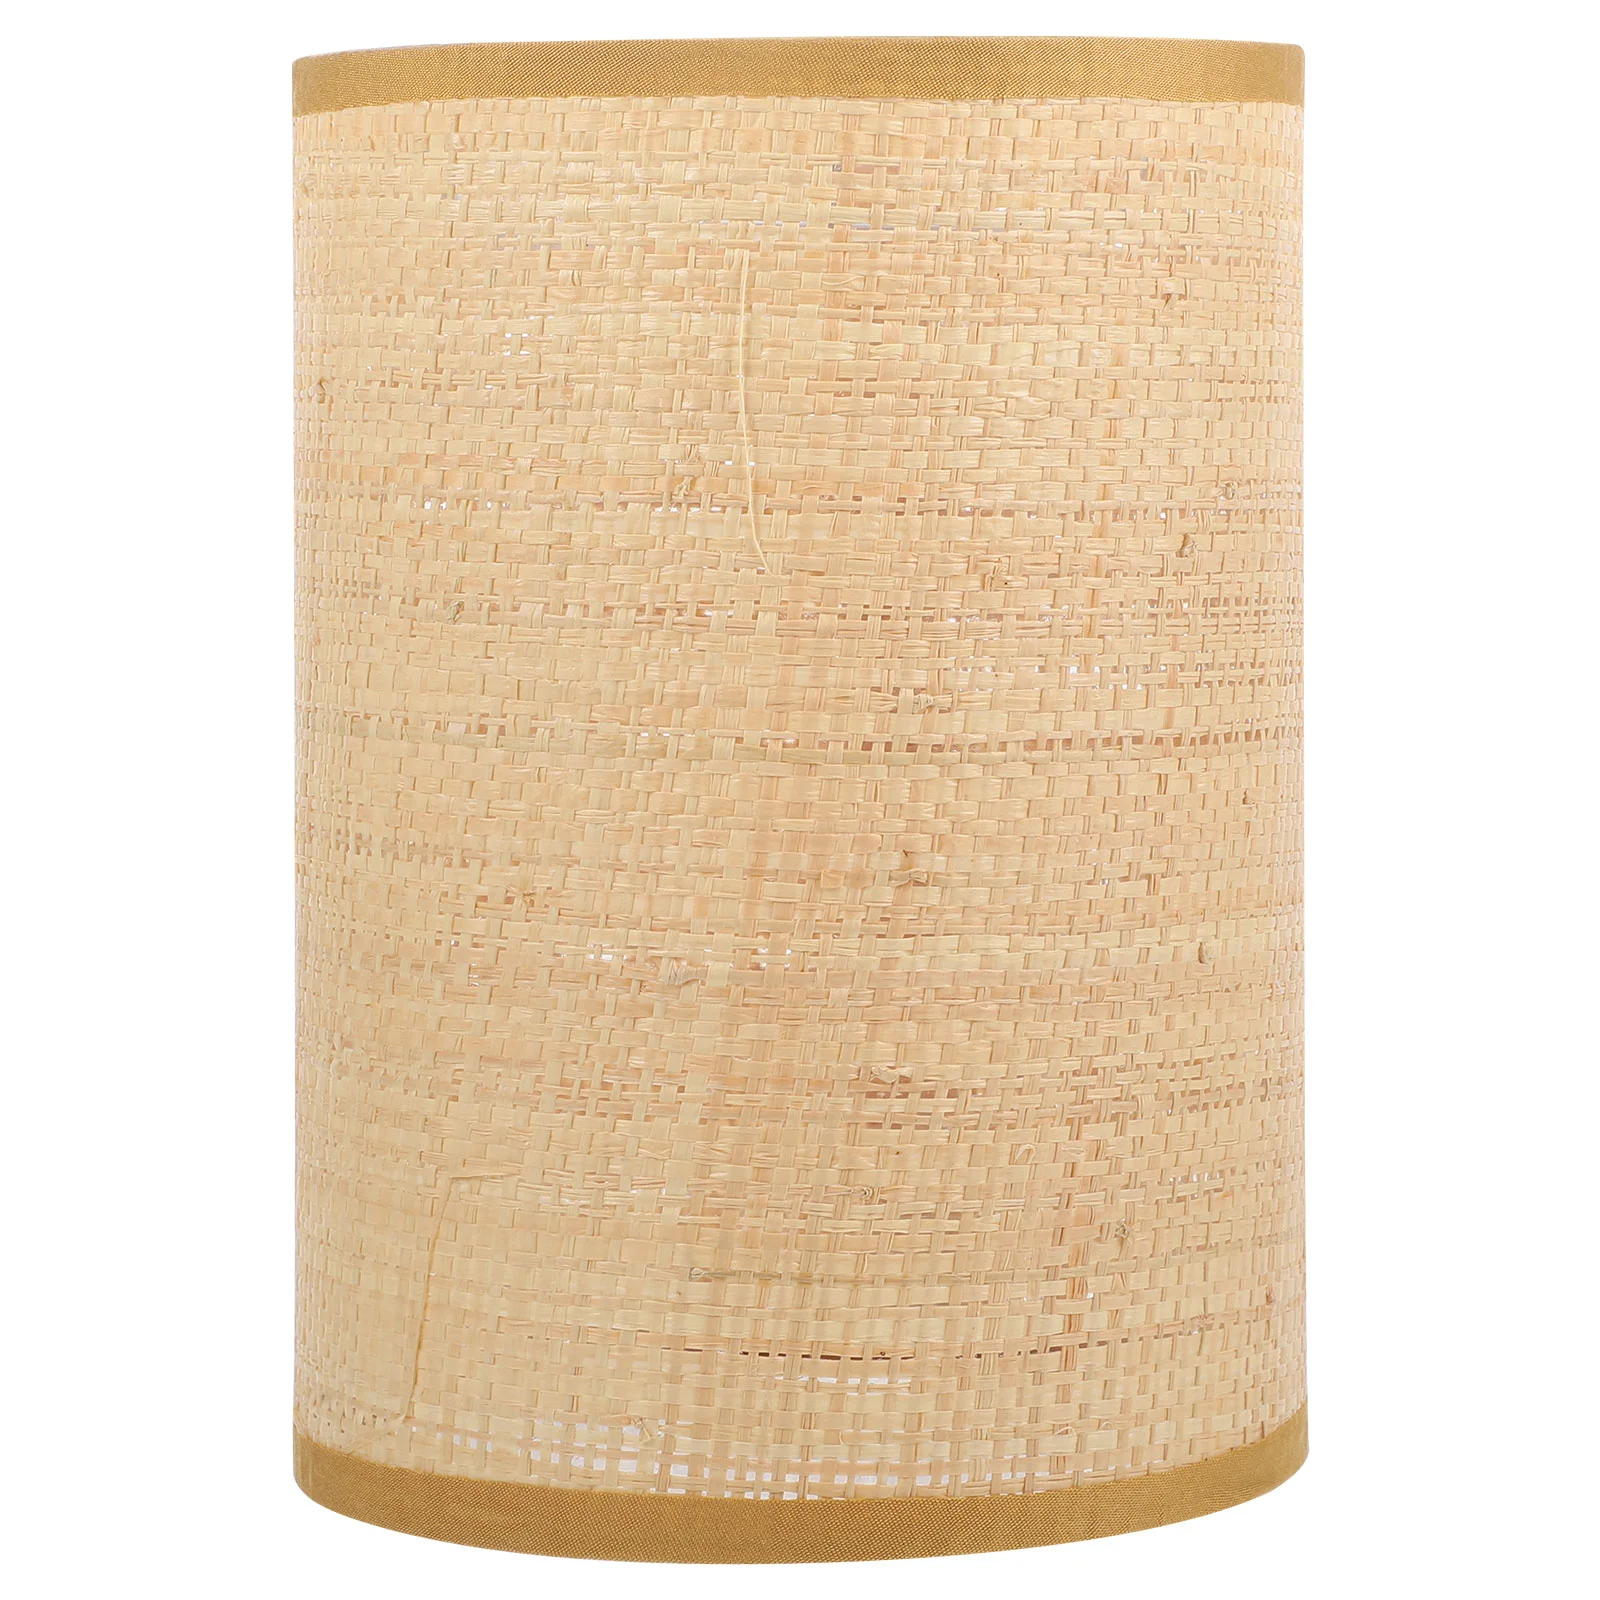 

Desk Lamp Shade E27/E14 Rattan Lampshade Rustic Country Lamp Shade Light Cover Screen For floor